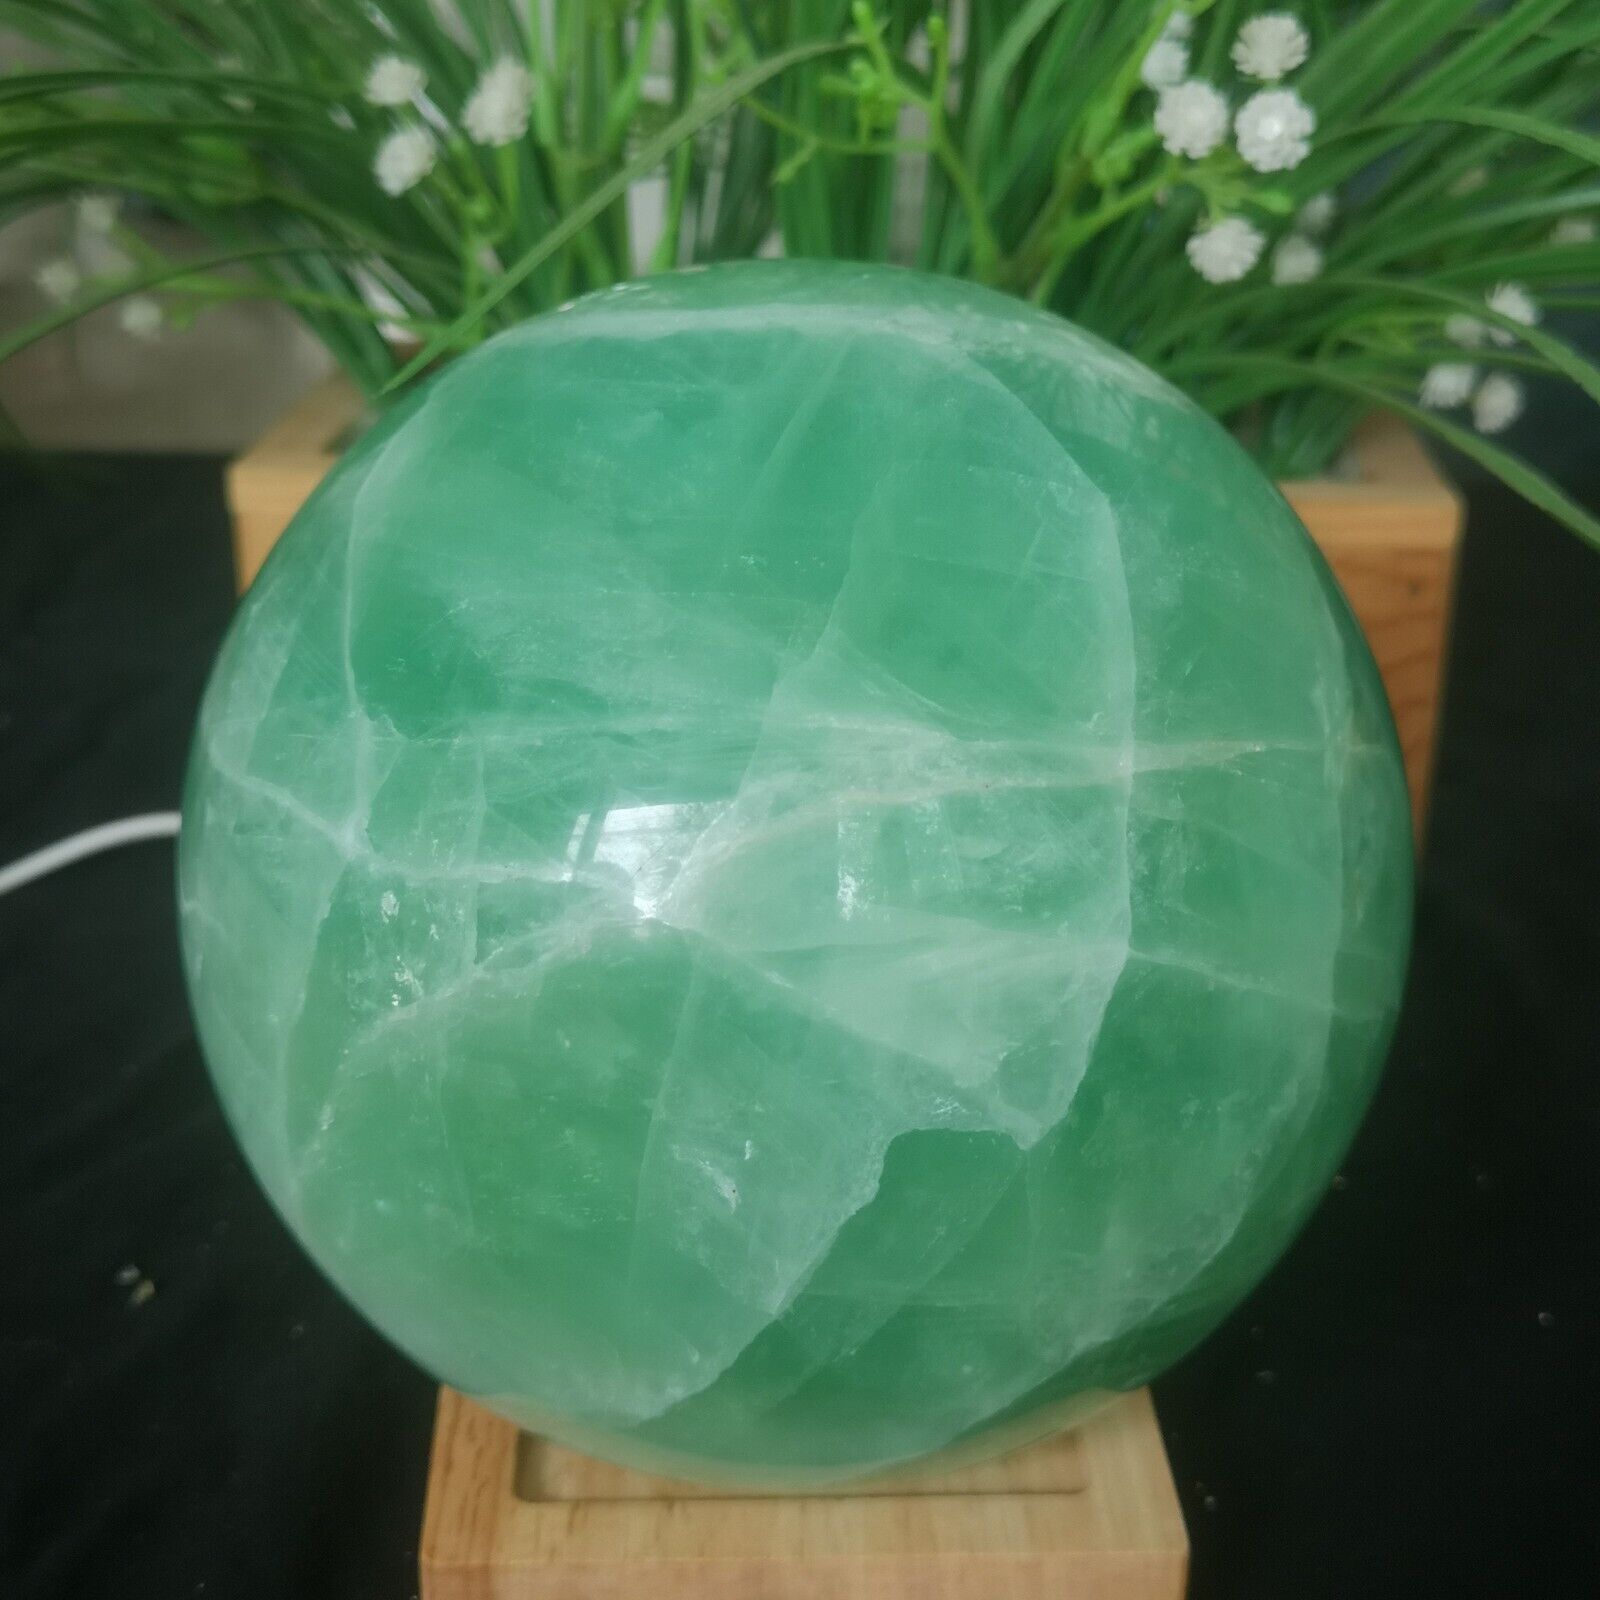 7.7LB Polishing and restoration of natural colored fluorite crystal bal 3500g